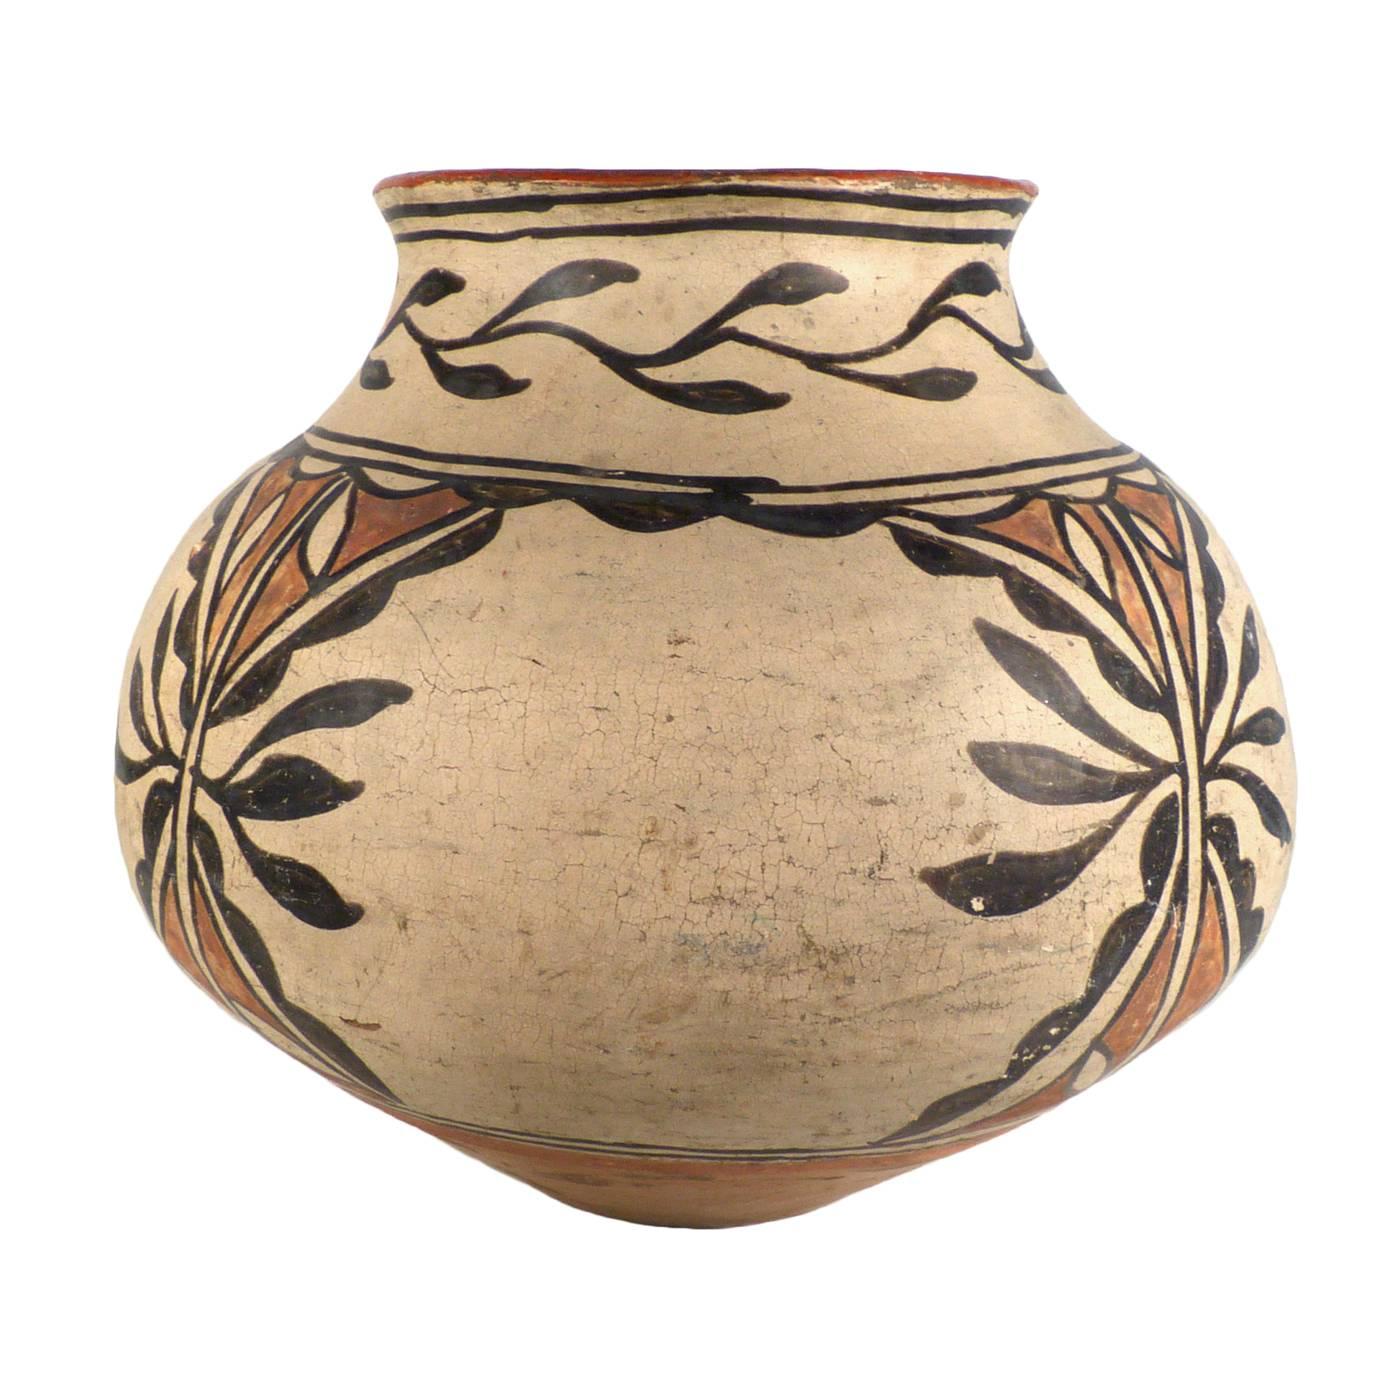 A traditionally made and fired pot from Tesuque Pueblo in New Mexico.